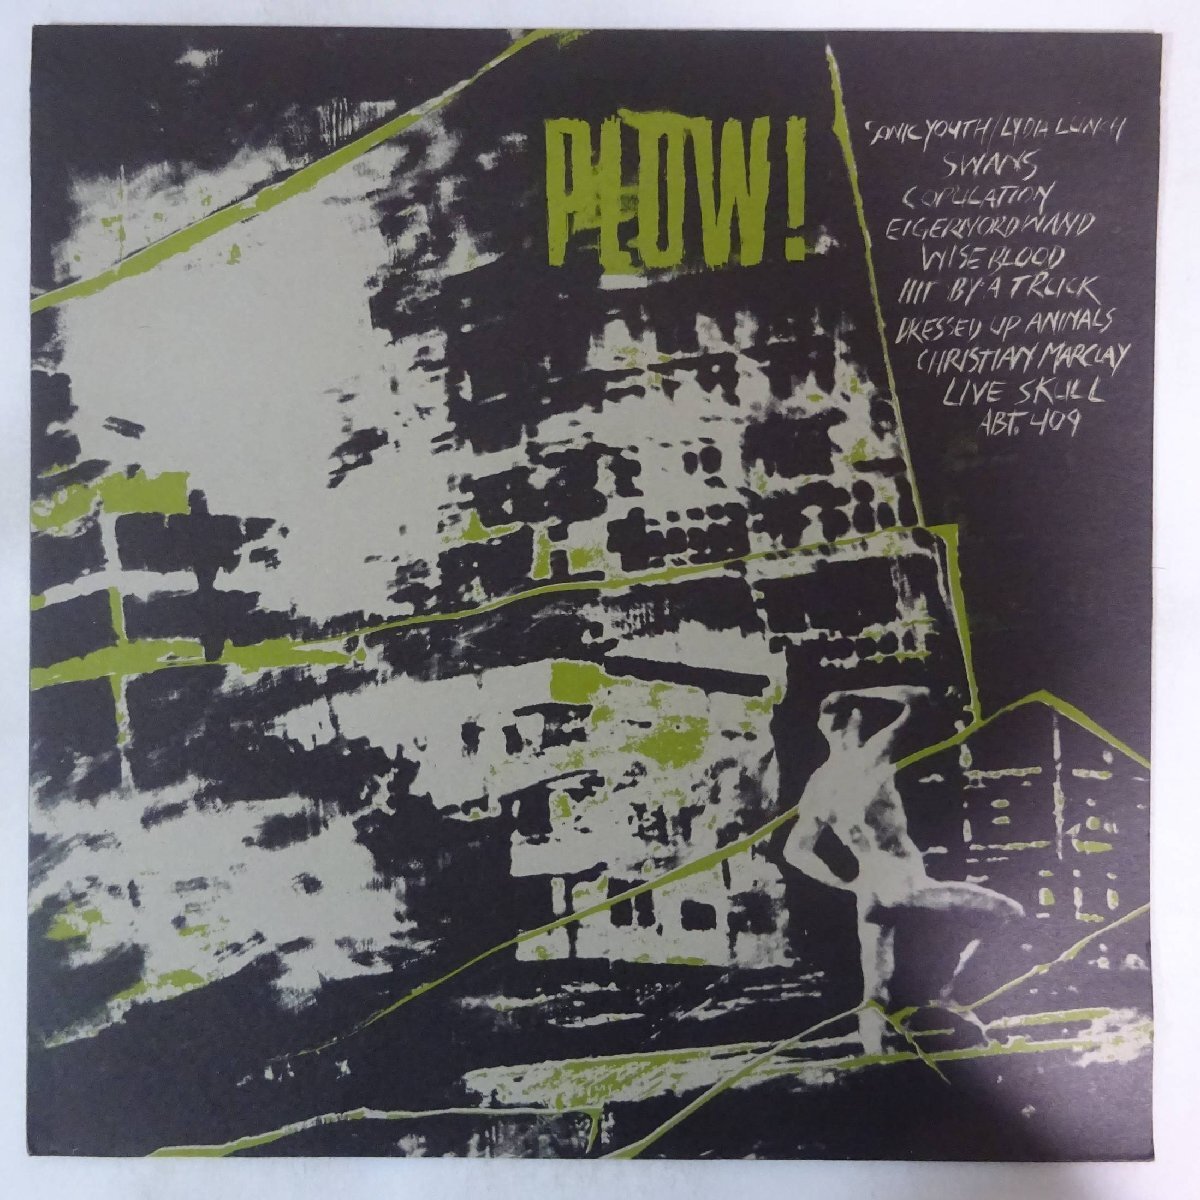 10024994;【UK&EU盤】Lydia Lunch, Sonic Youth, Copulation, Christian Marclay, 他 / Plow!の画像1